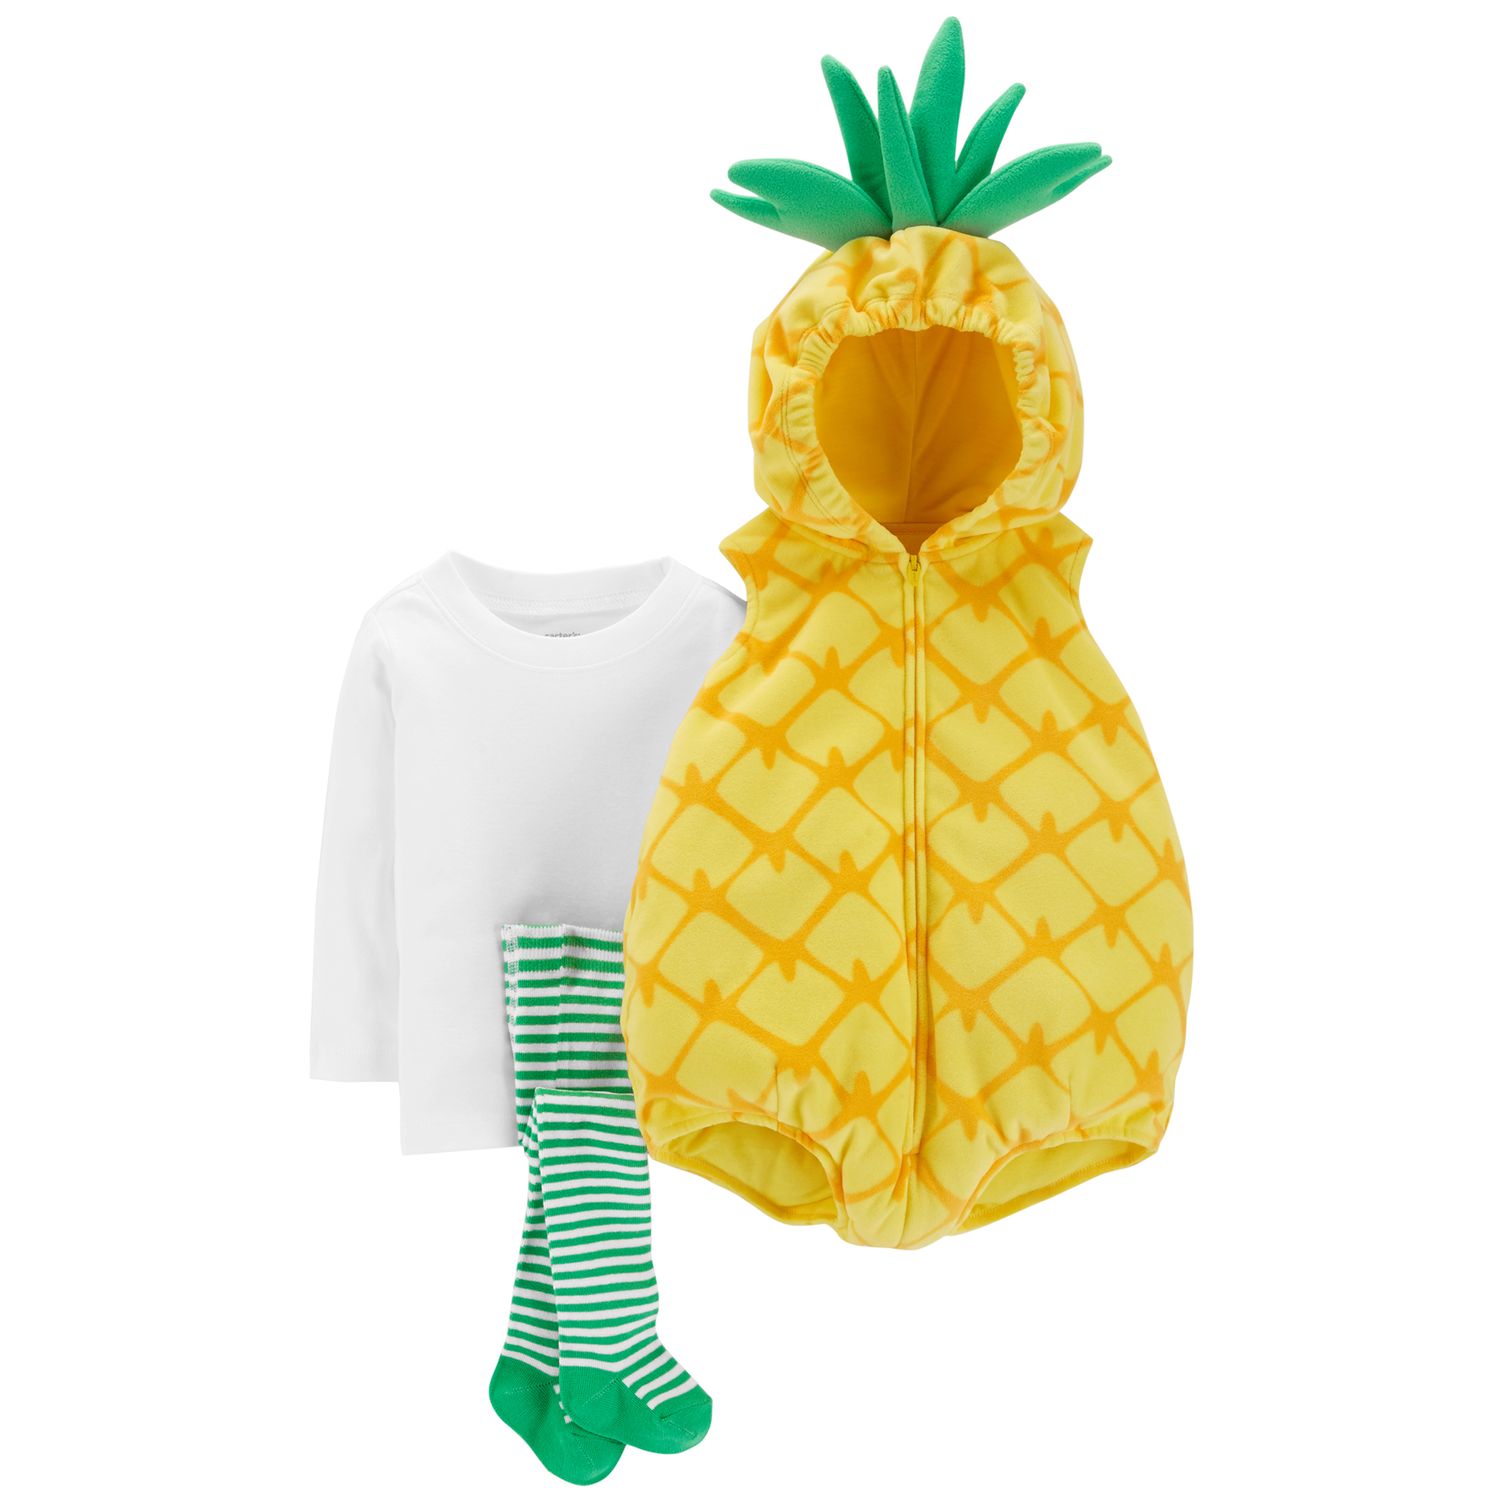 pineapple outfit baby girl